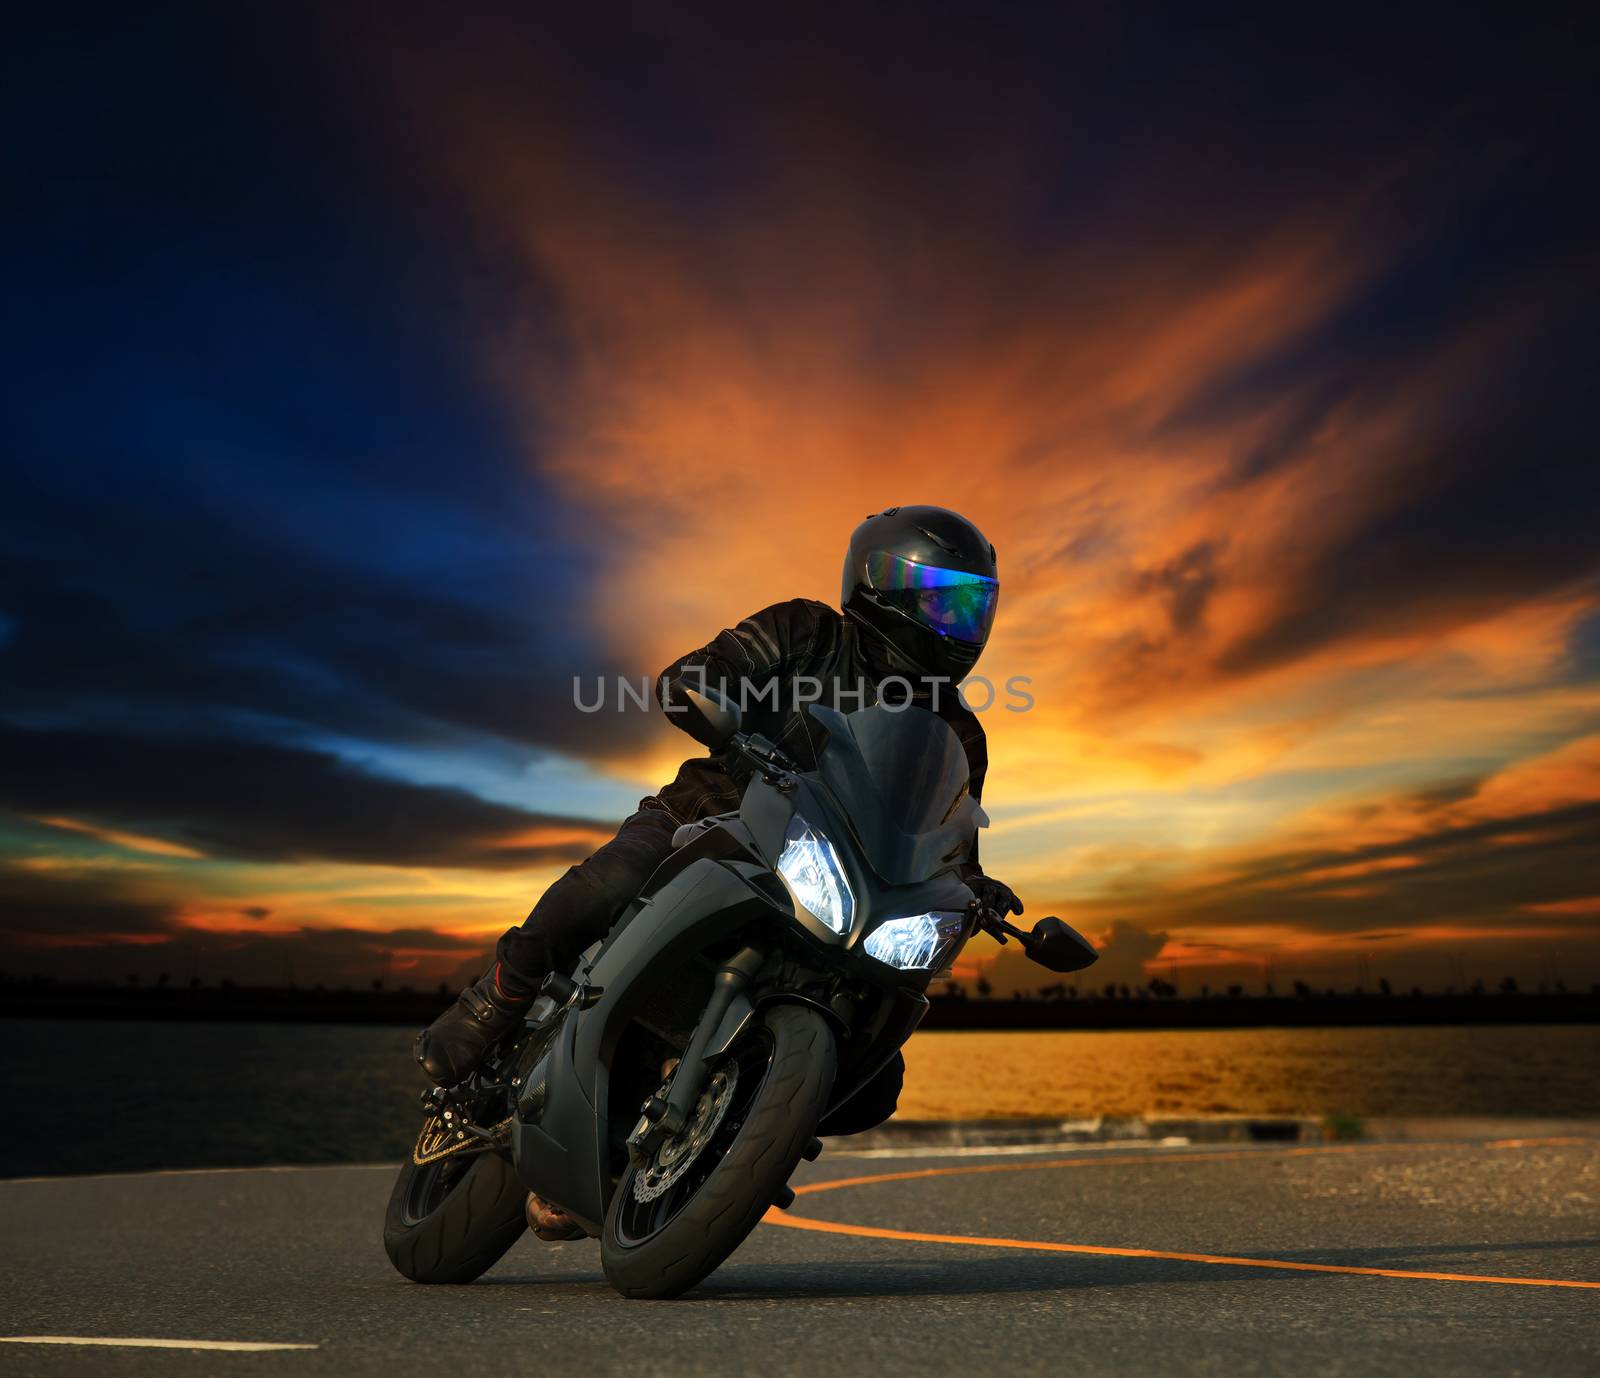 young man riding big bike motorcycle leaning curve on asphalt highways road against beautiful dusky sky use as people adventure sport leisure theme